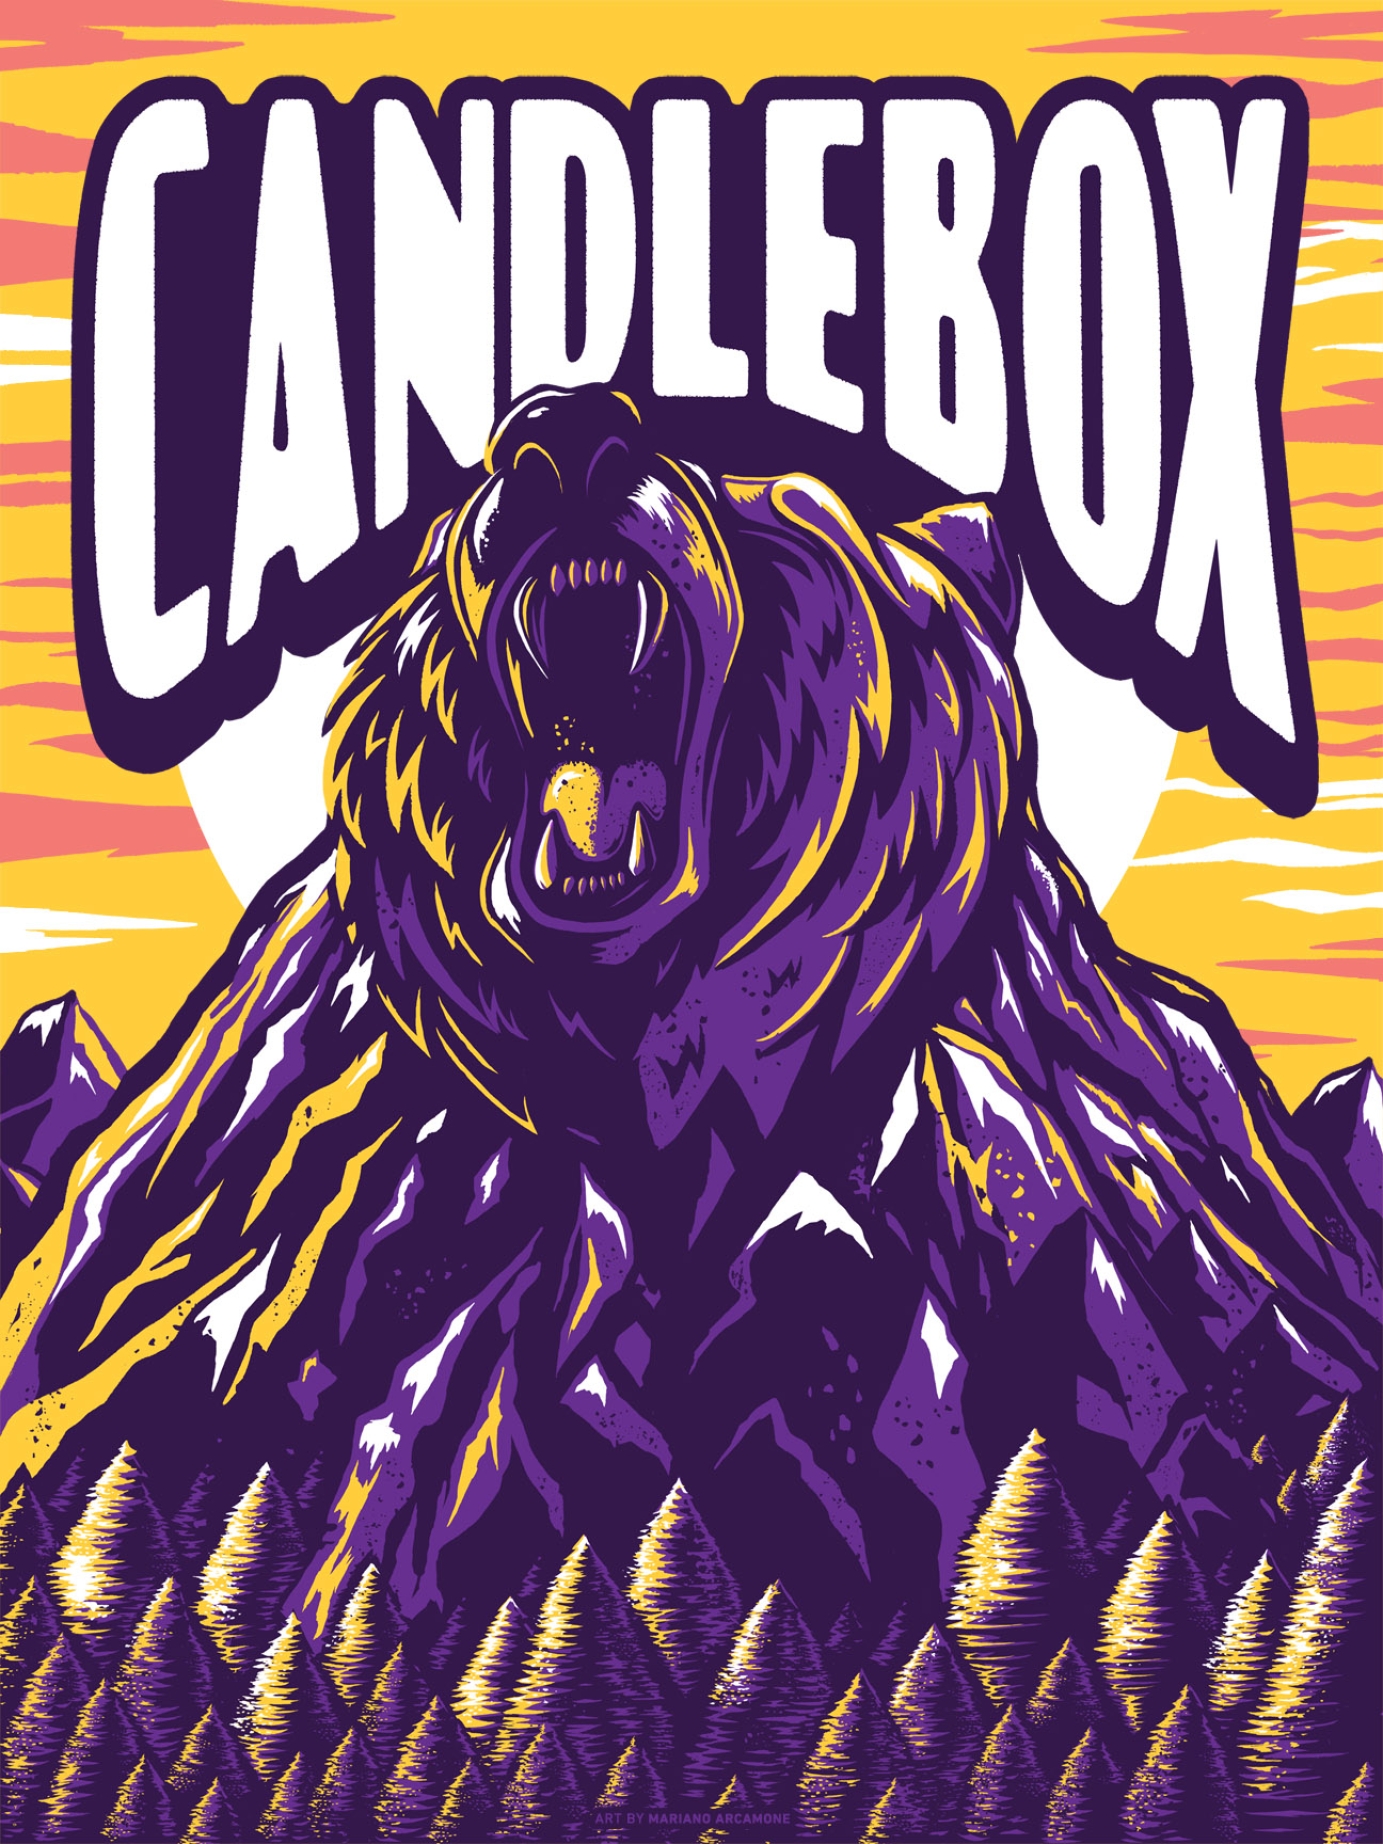 Candlebox - North American Tour poster